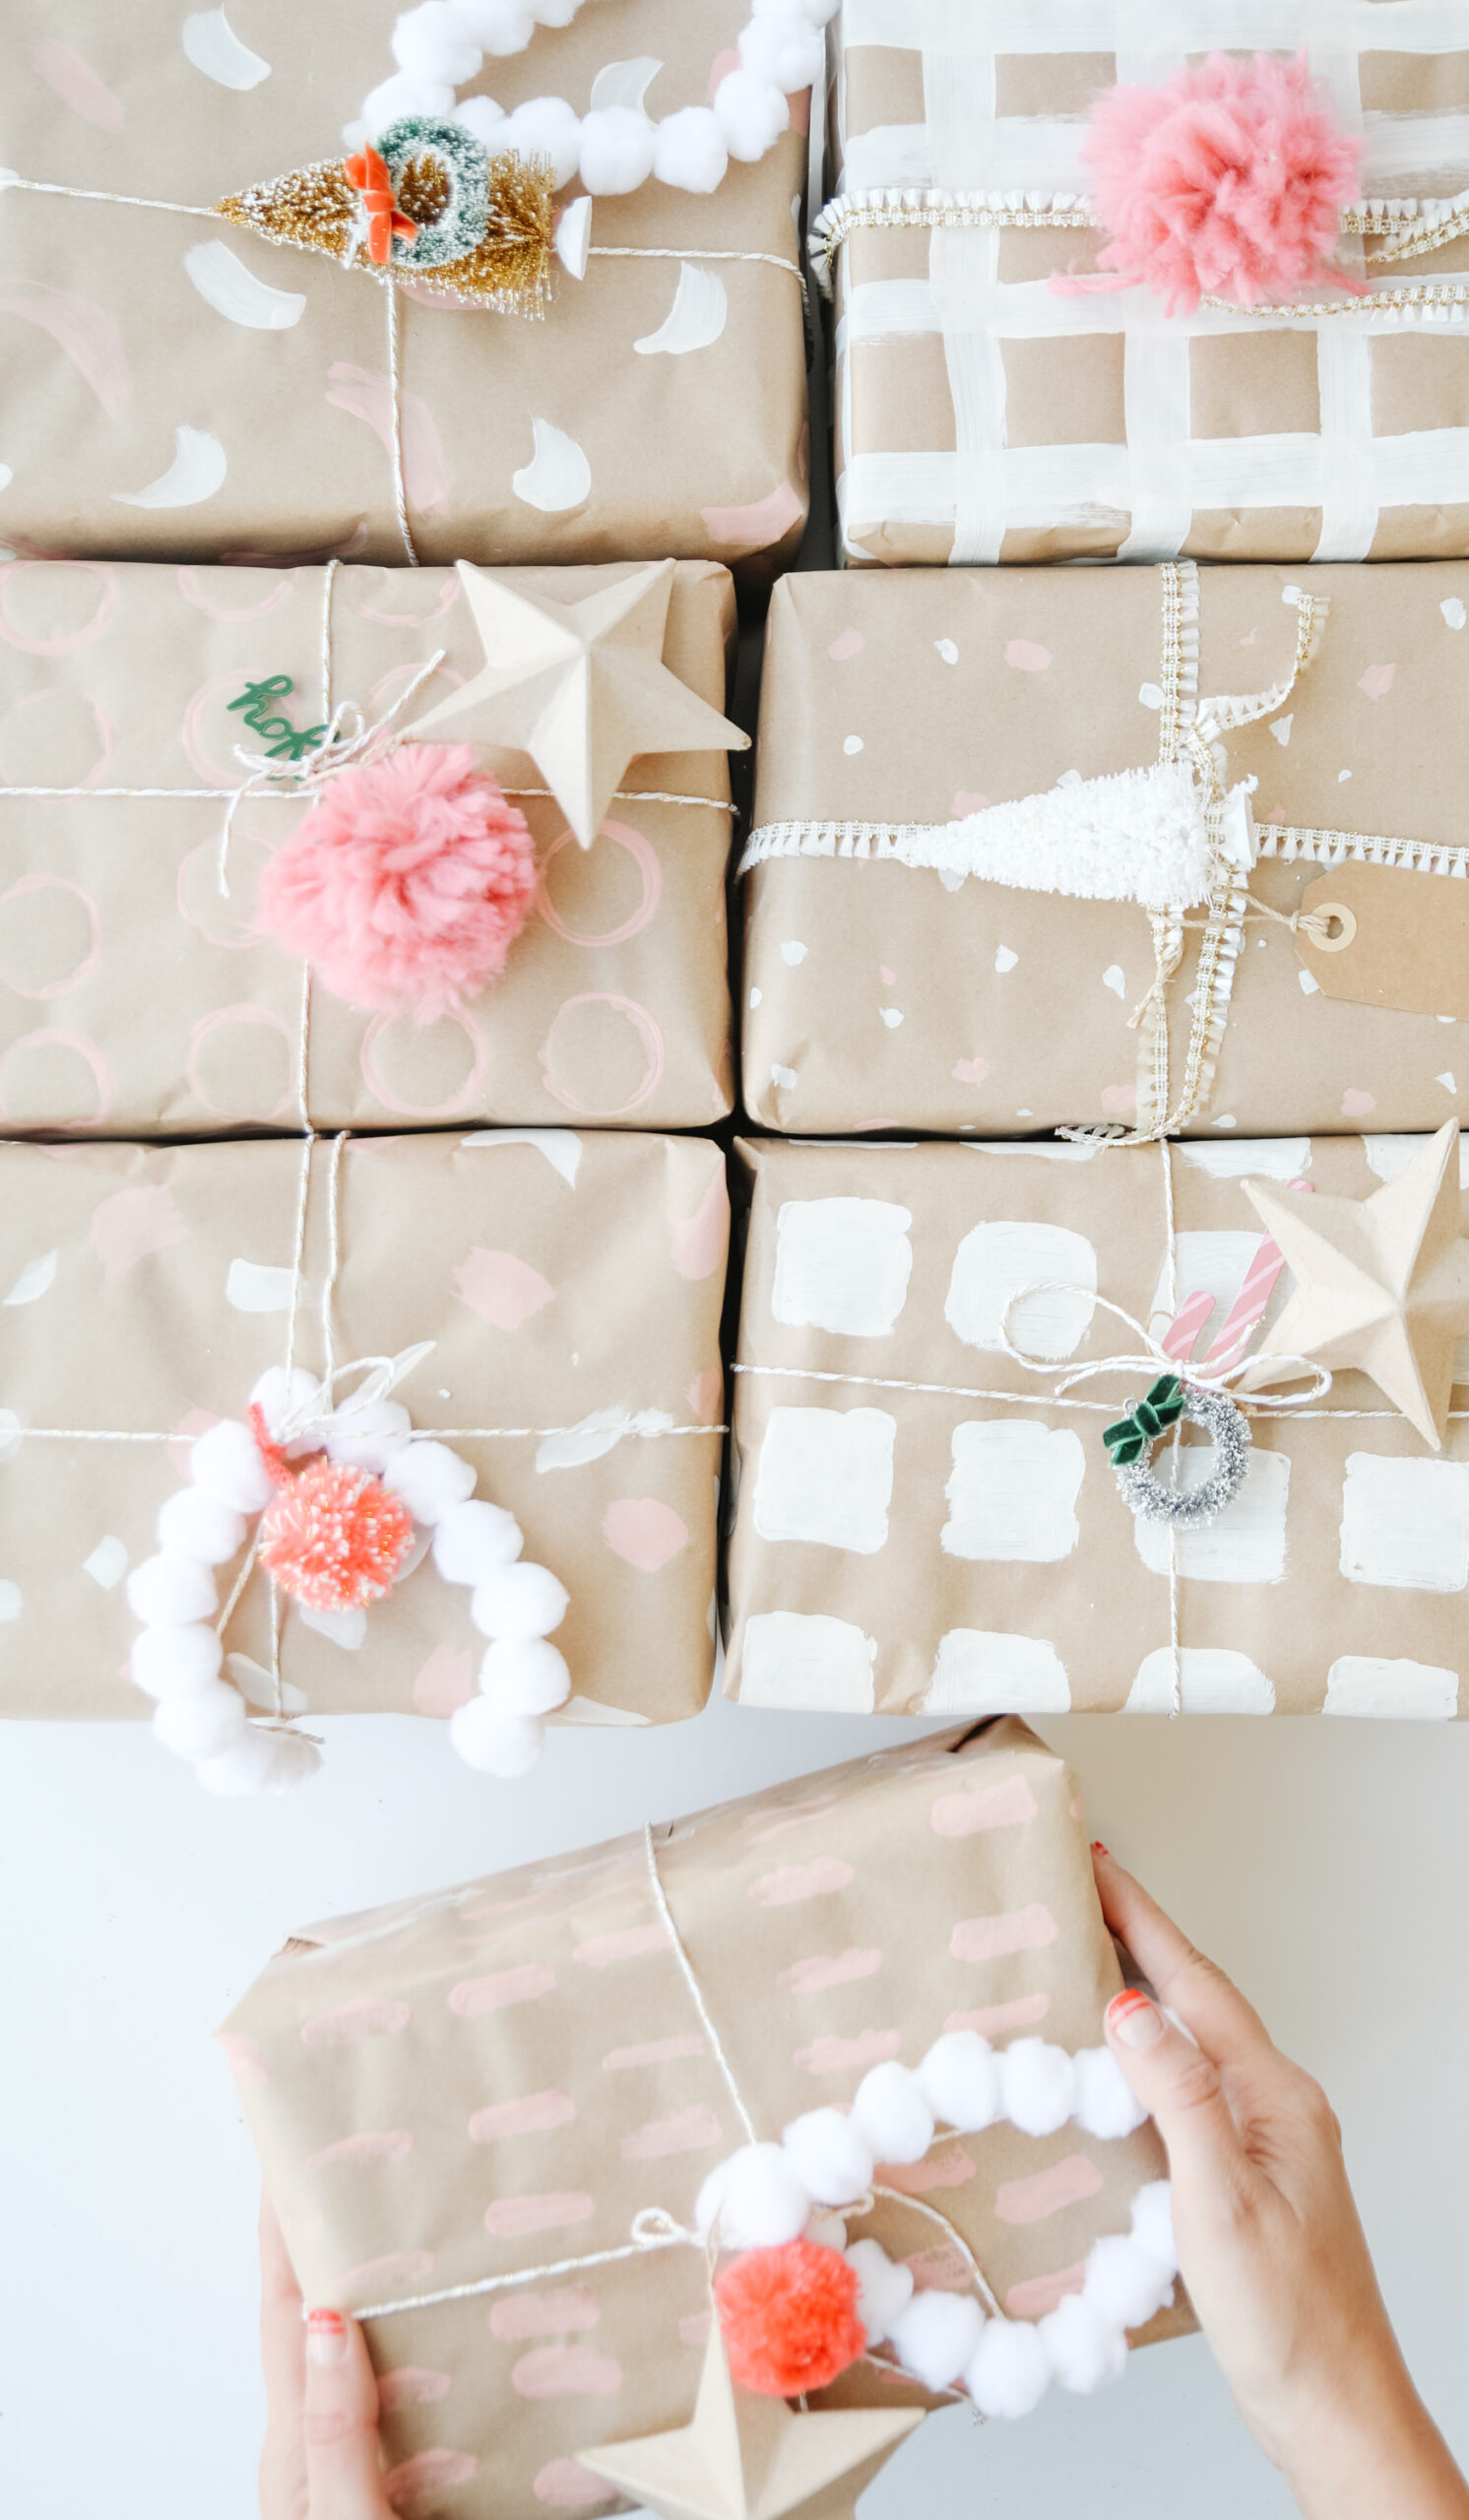 Let’s Embrace Holiday Festive Dressing & This Greener Gifting DIY Idea!